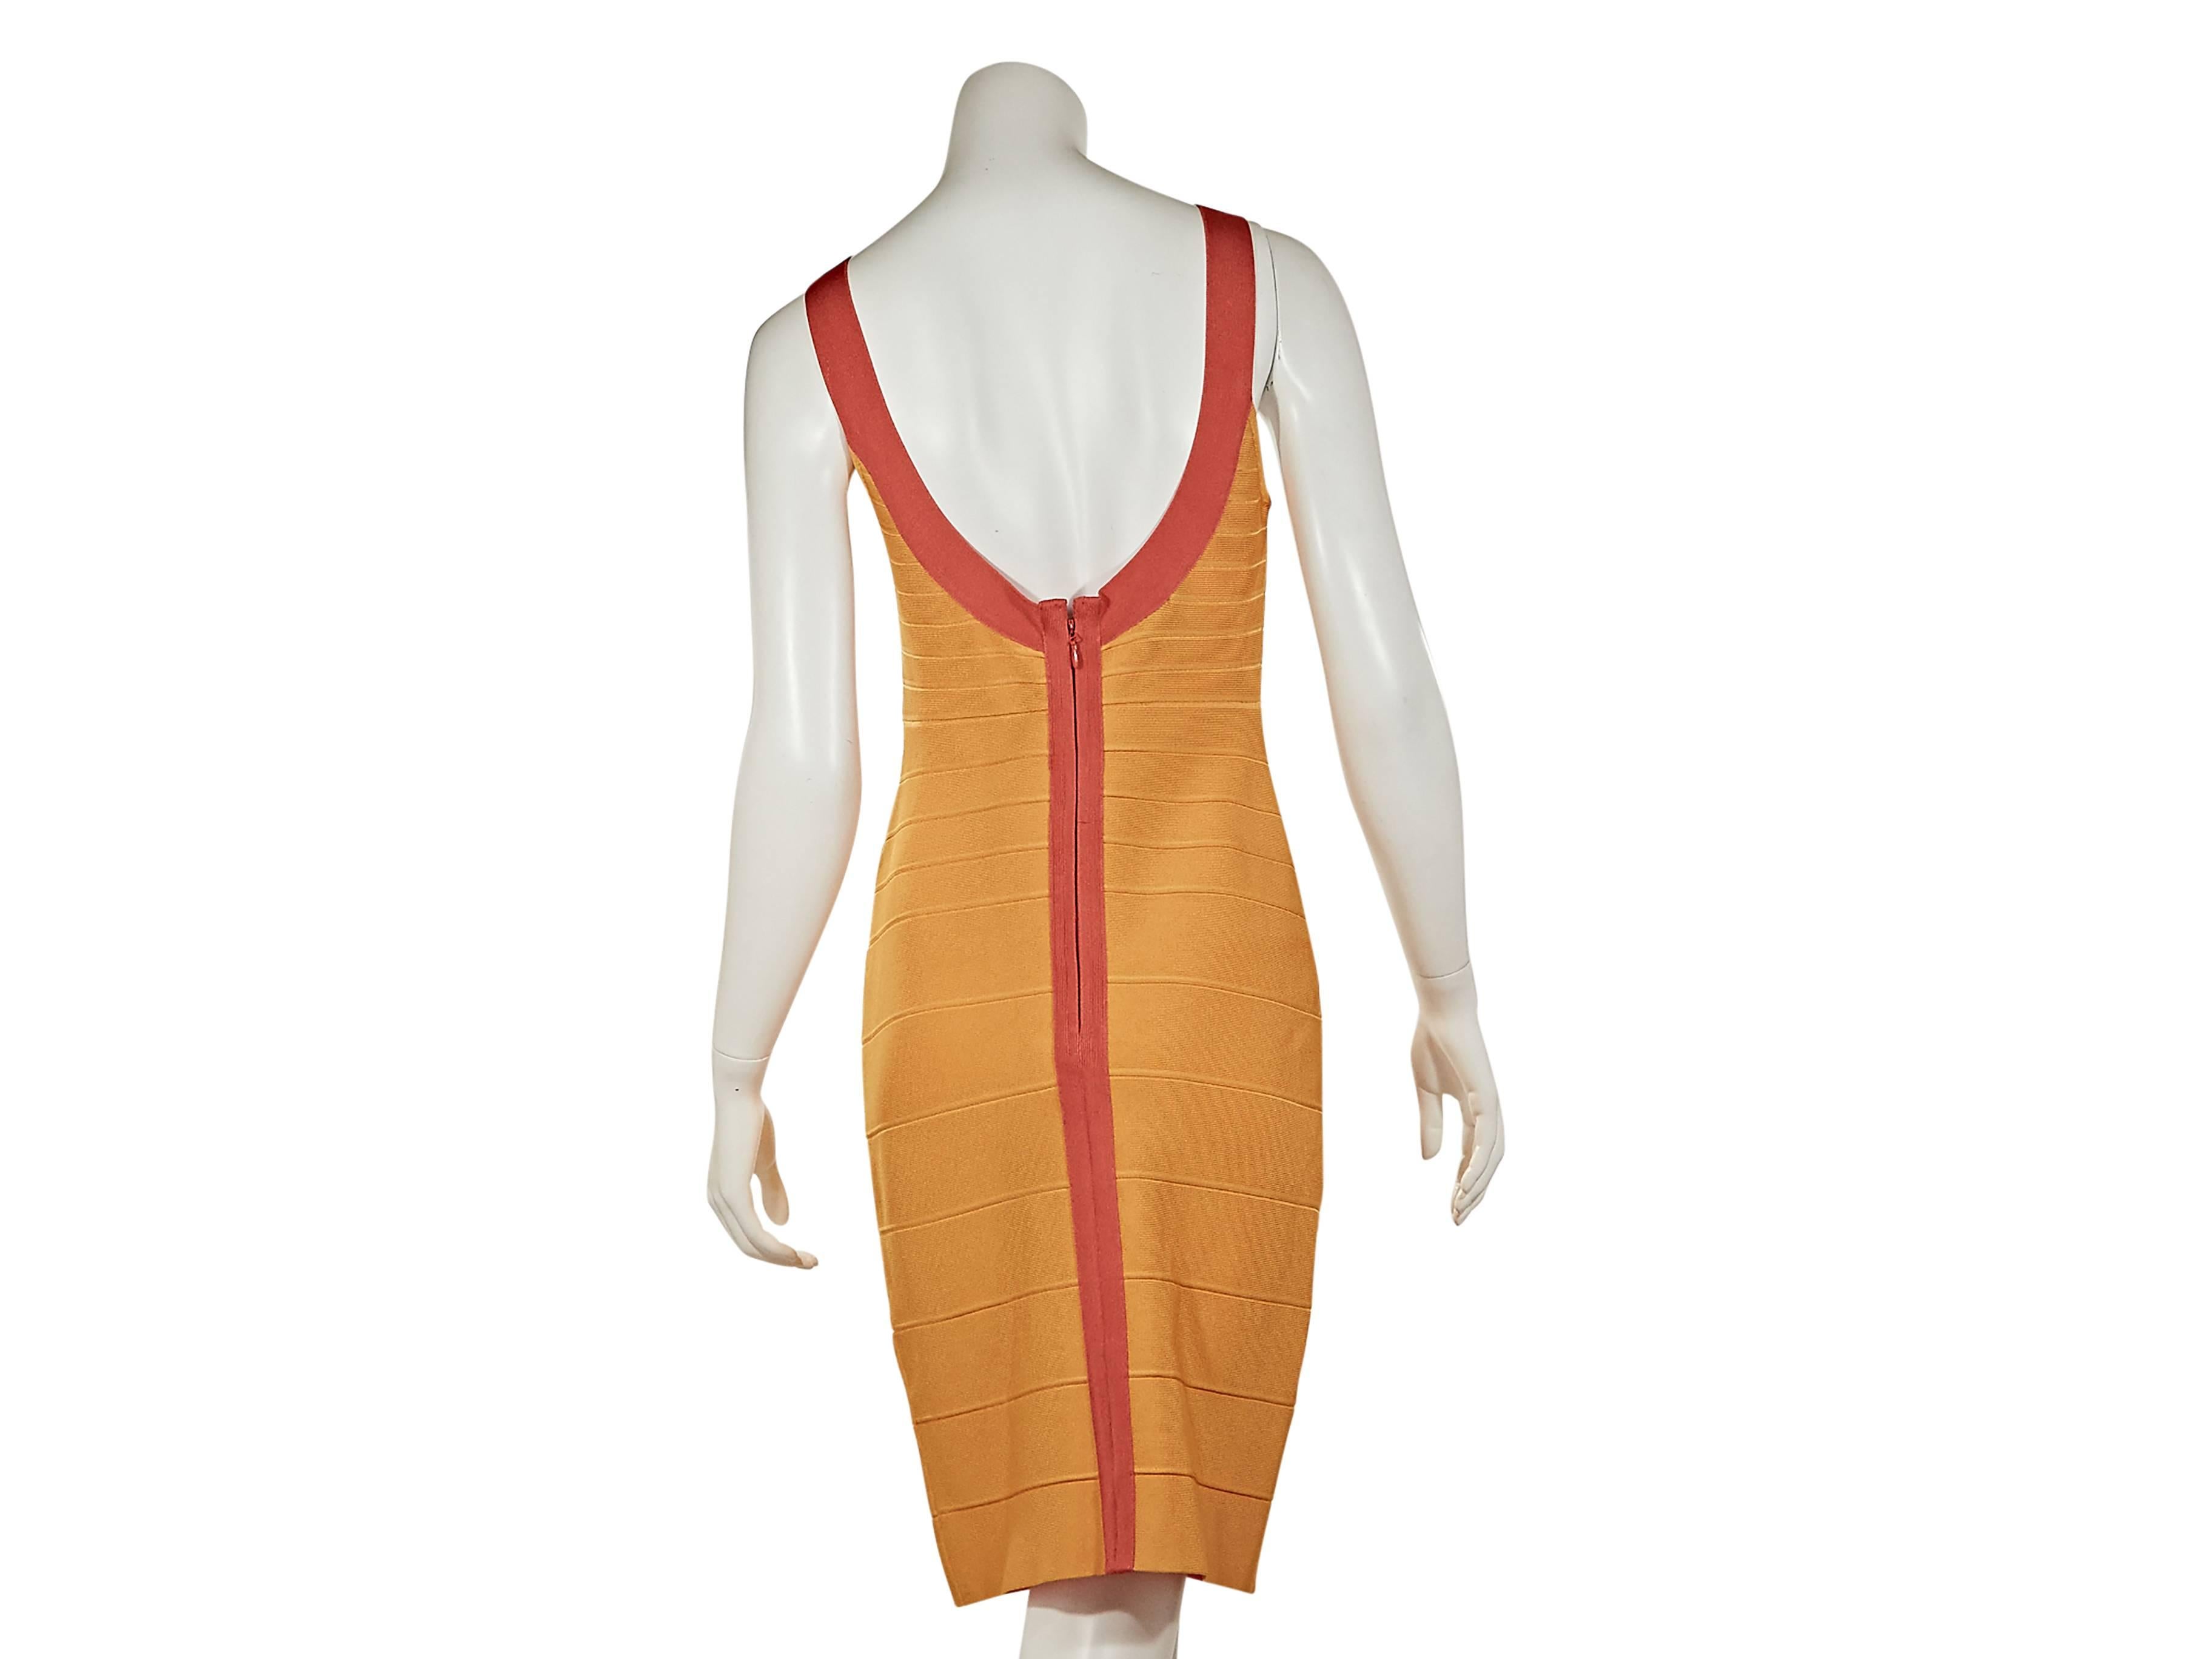 Yellow and orange bandage dress by Herve Leger.  Deep scoopneck and back.  Sleeveless.  Concealed back zip closure.  